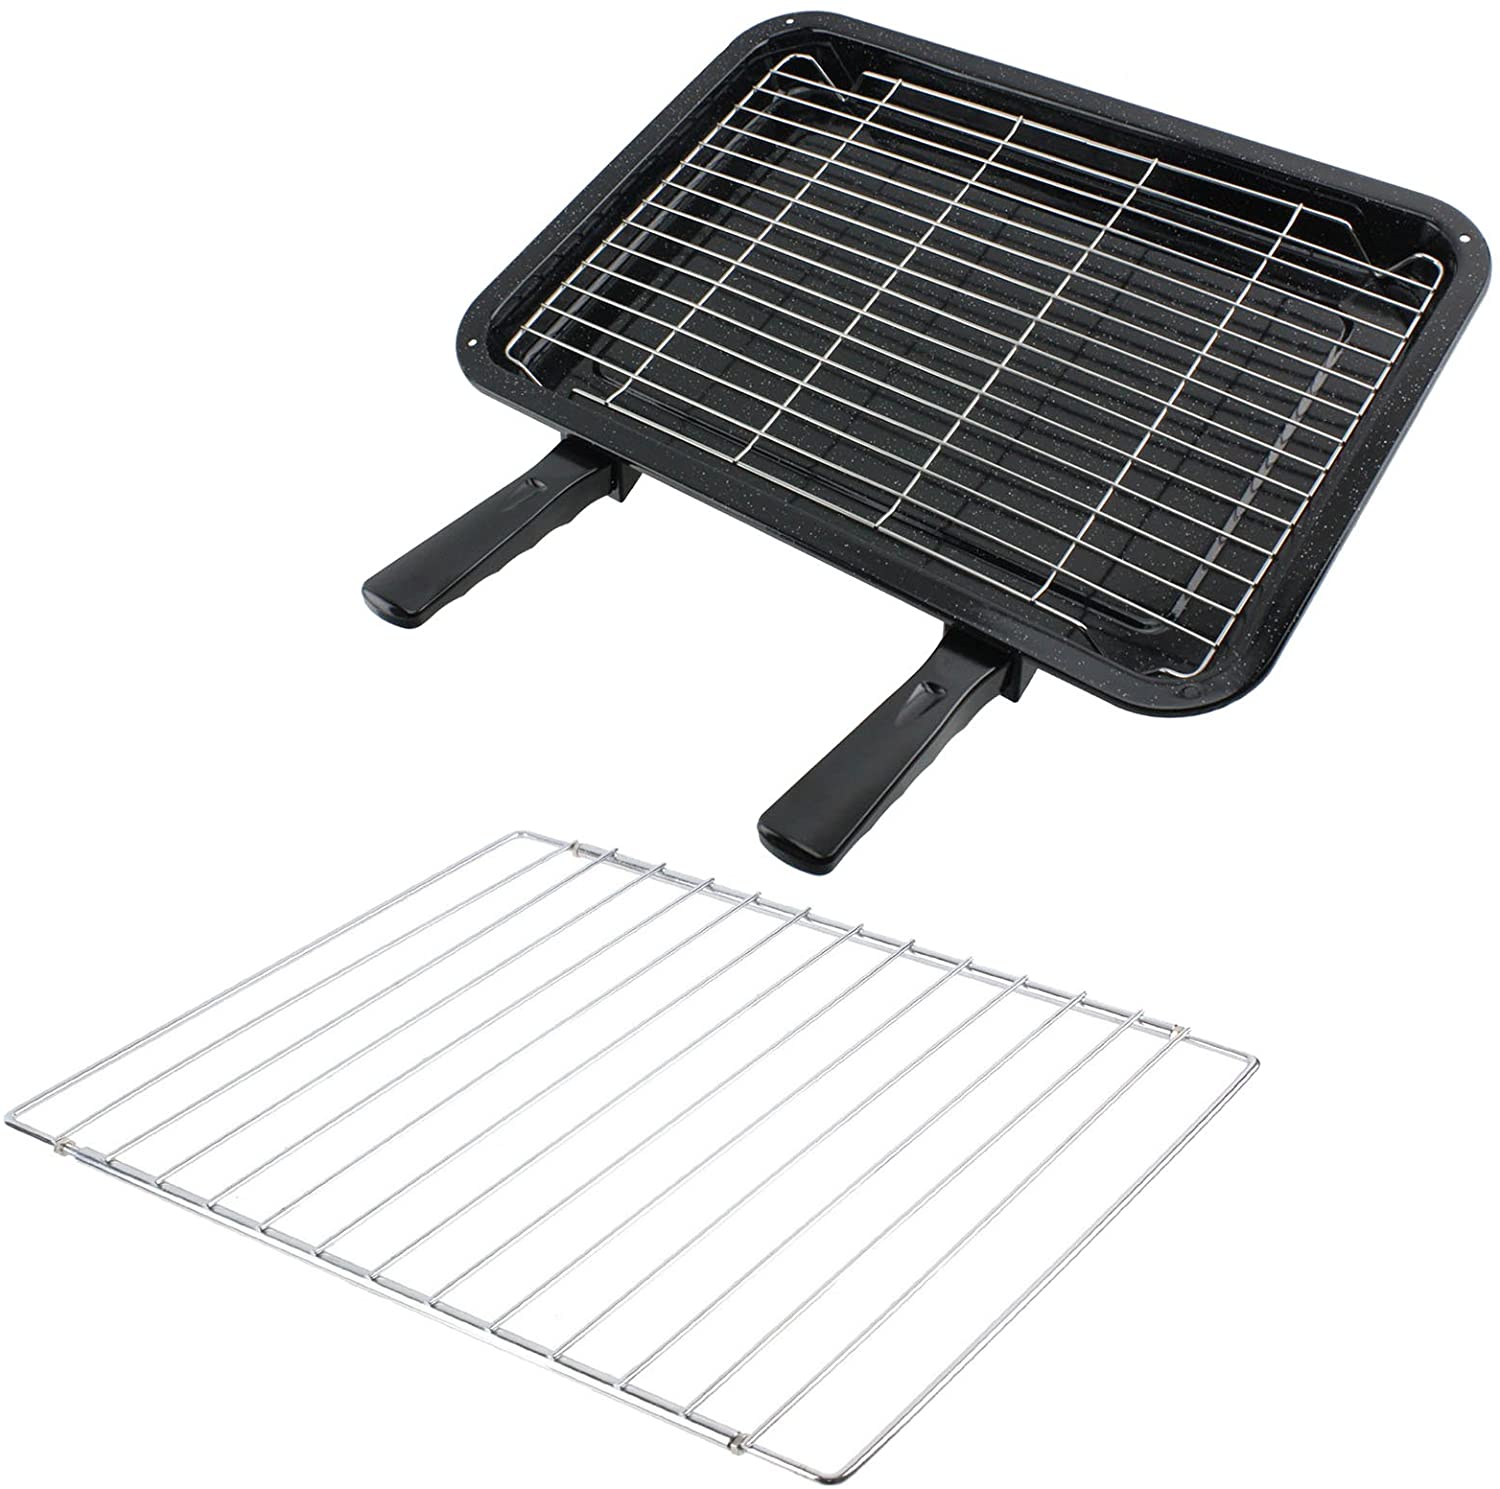 Medium Grill Pan, Rack & Dual Detachable Handles with Adjustable Shelf for NEFF Oven Cookers